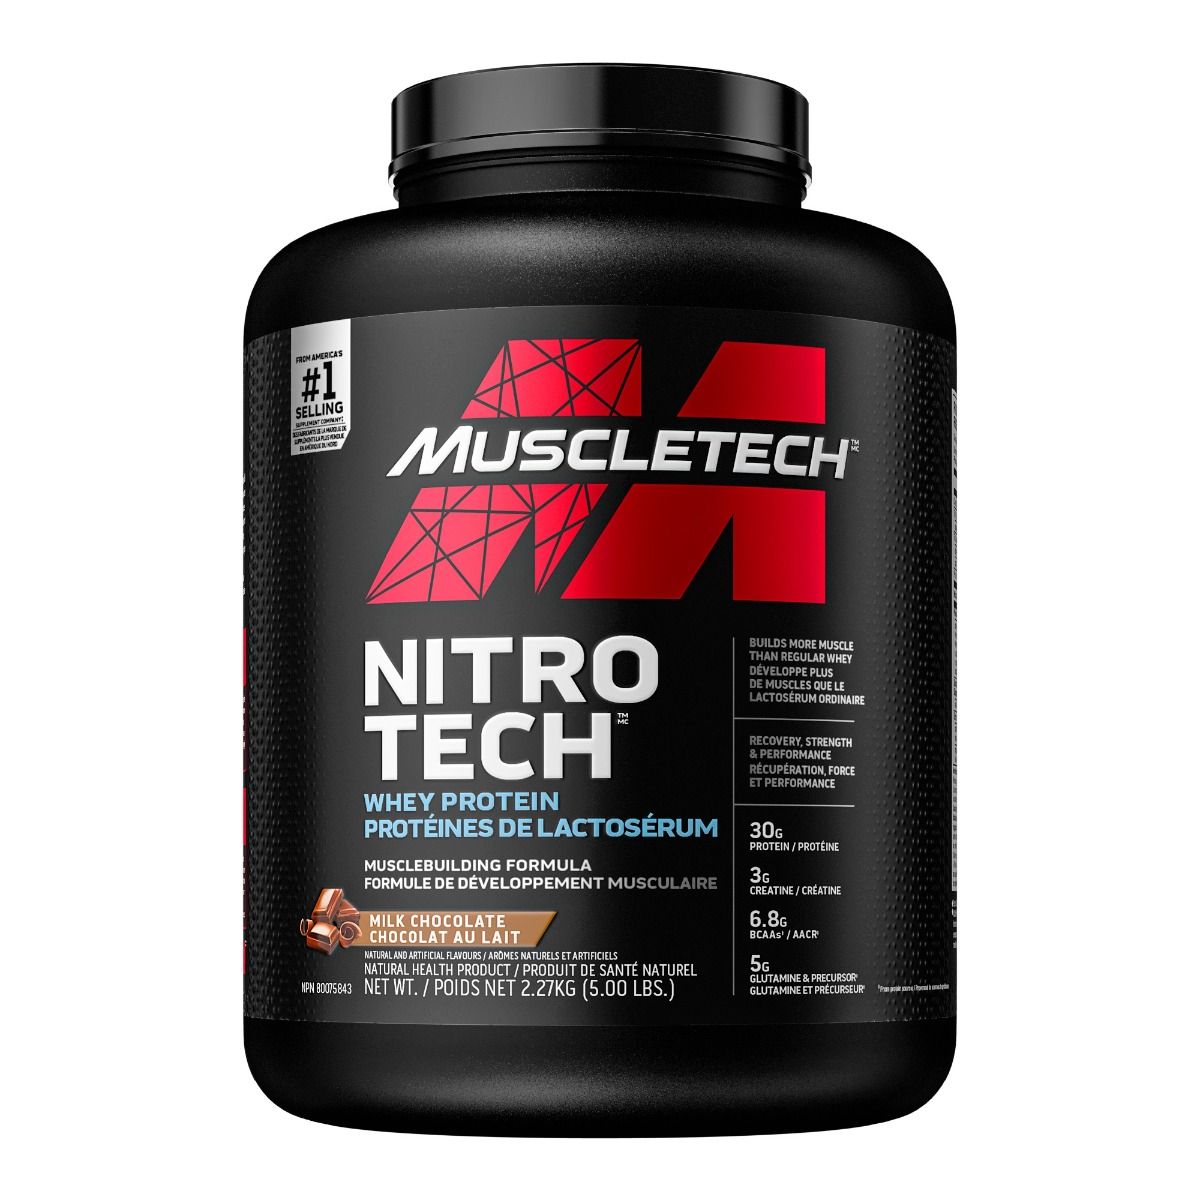 MuscleTech Nitro-Tech (5 lbs) muscletech-nitro-tech-whey-isolate-lean-muscle-builder-1 Whey Protein Milk chocolate MuscleTech